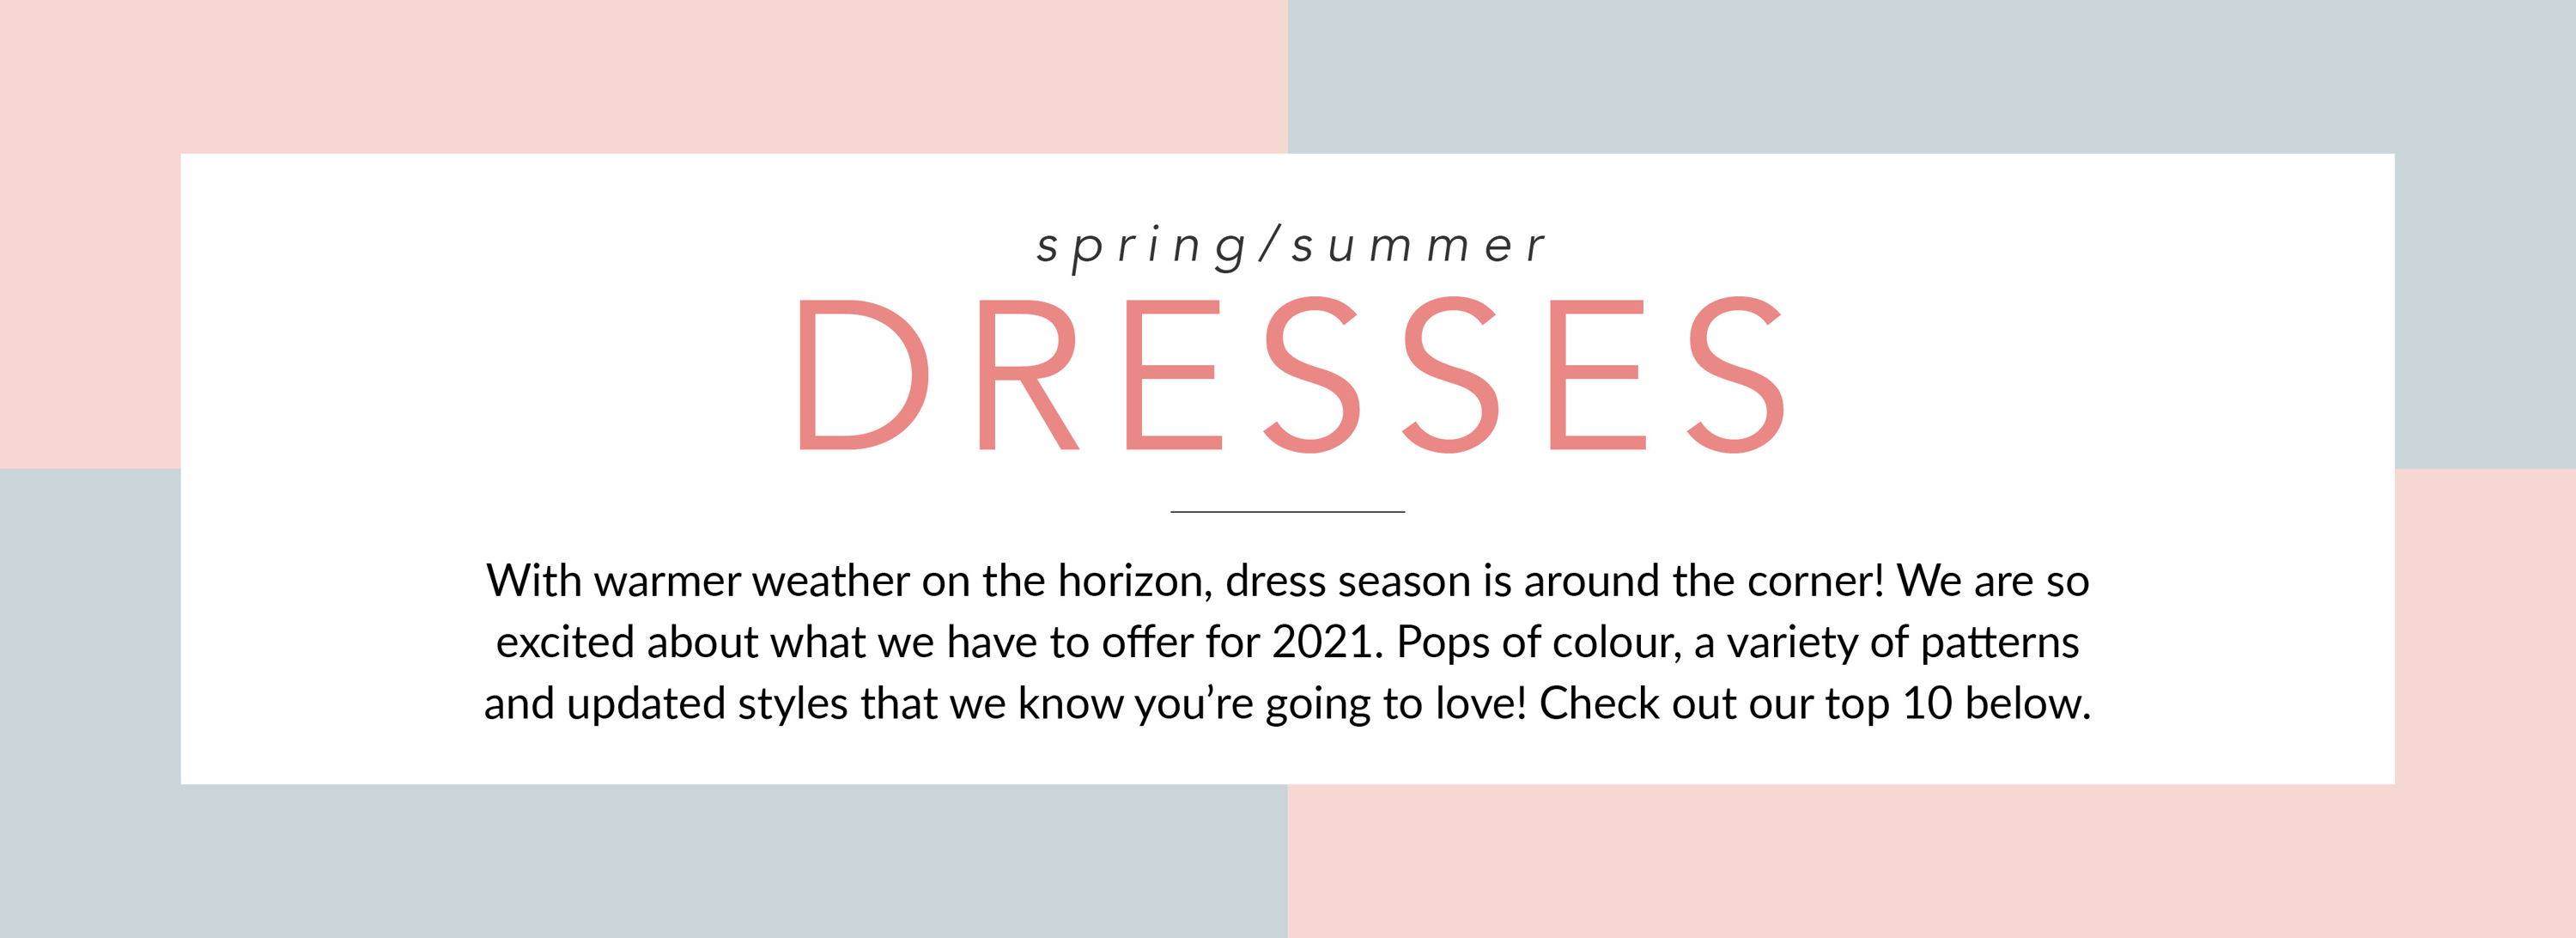 Spring and Summer Dresses 2021